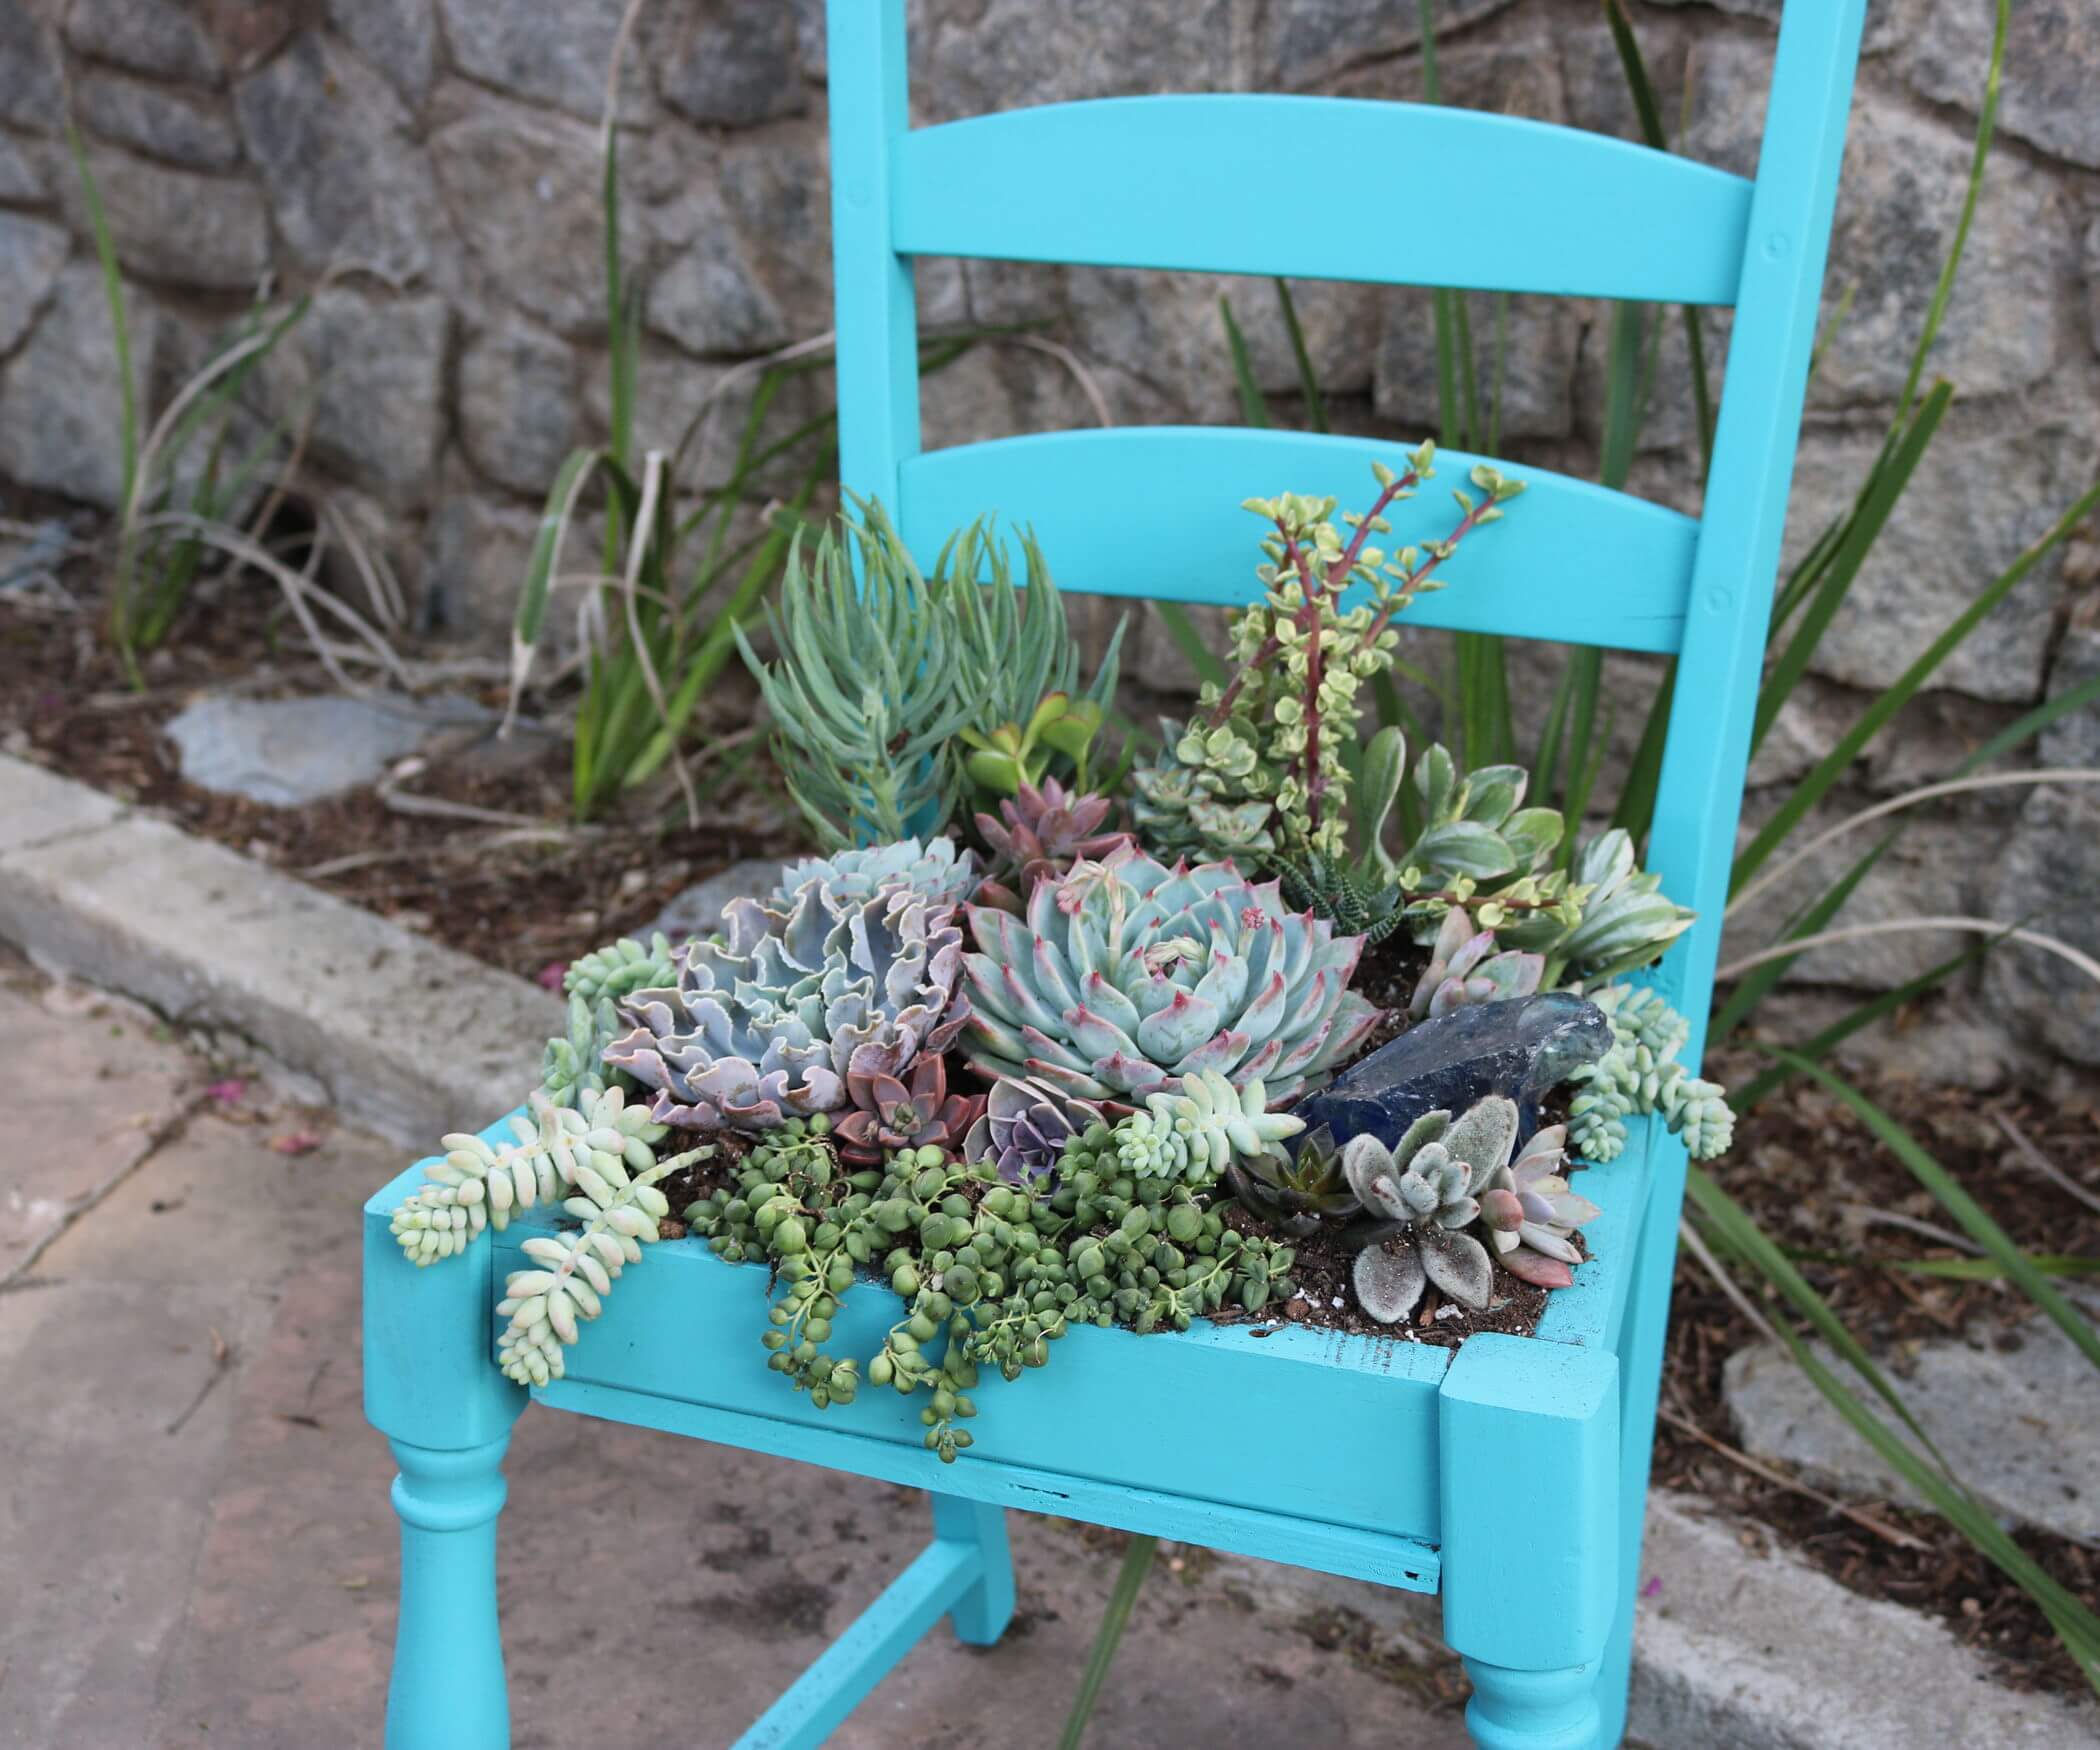 Give a Succulent Garden Its Own Seat